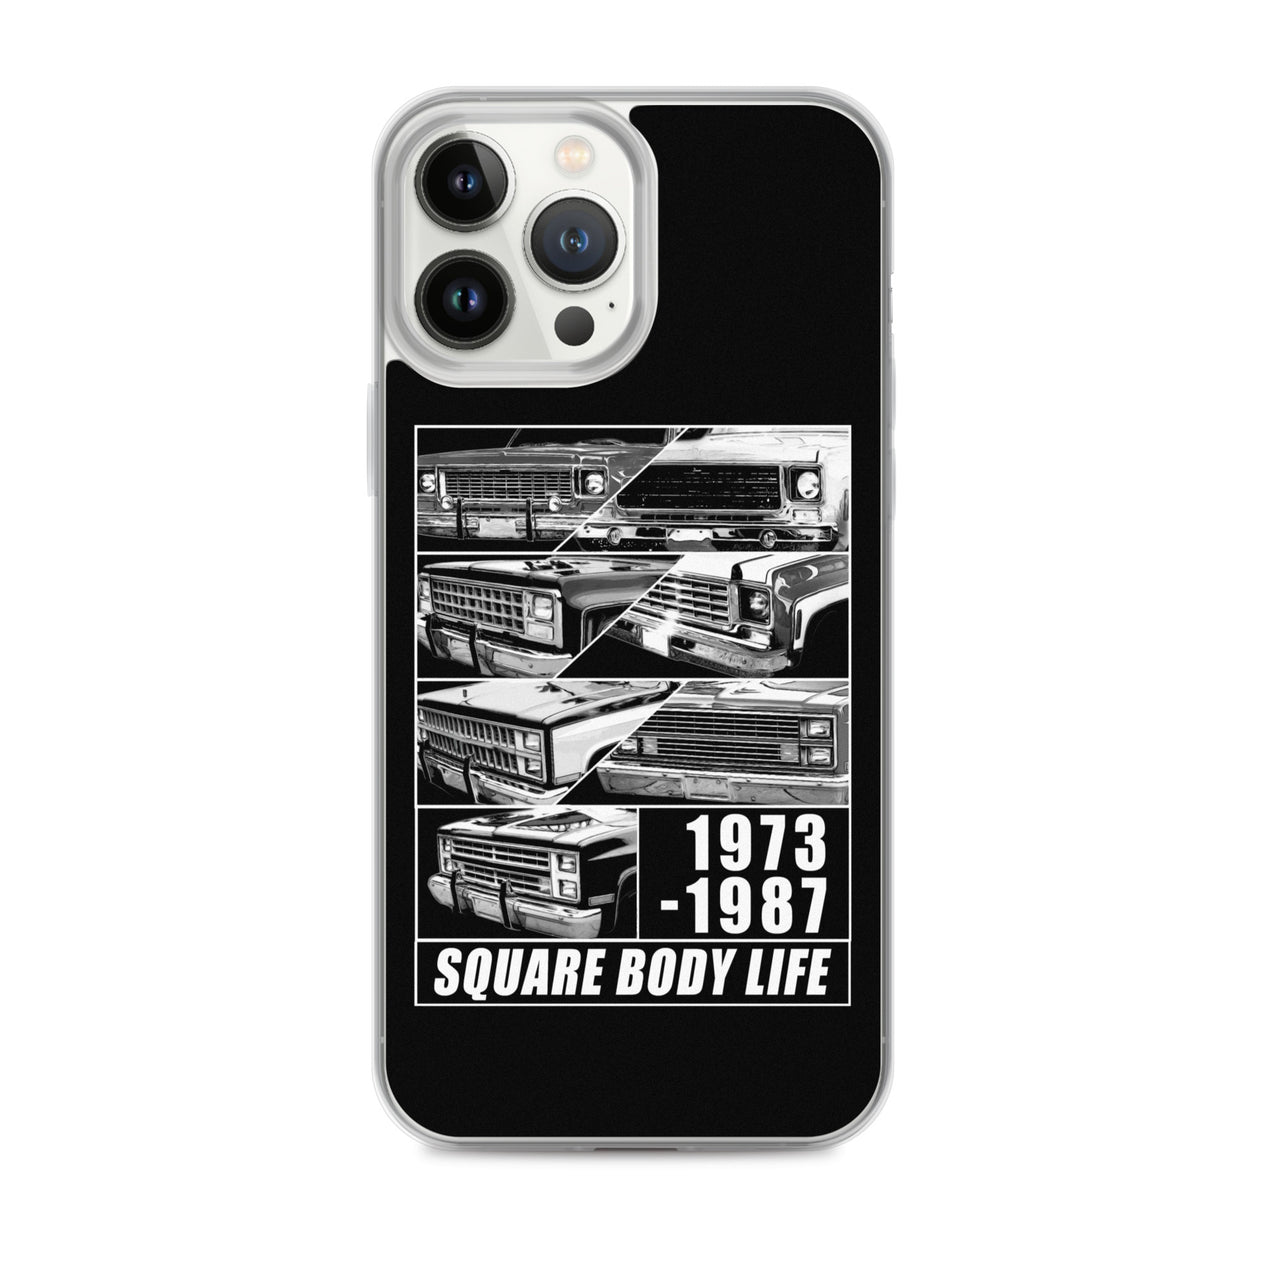 Square Body Truck Grilles Phone Case For iPhone 13 pro max